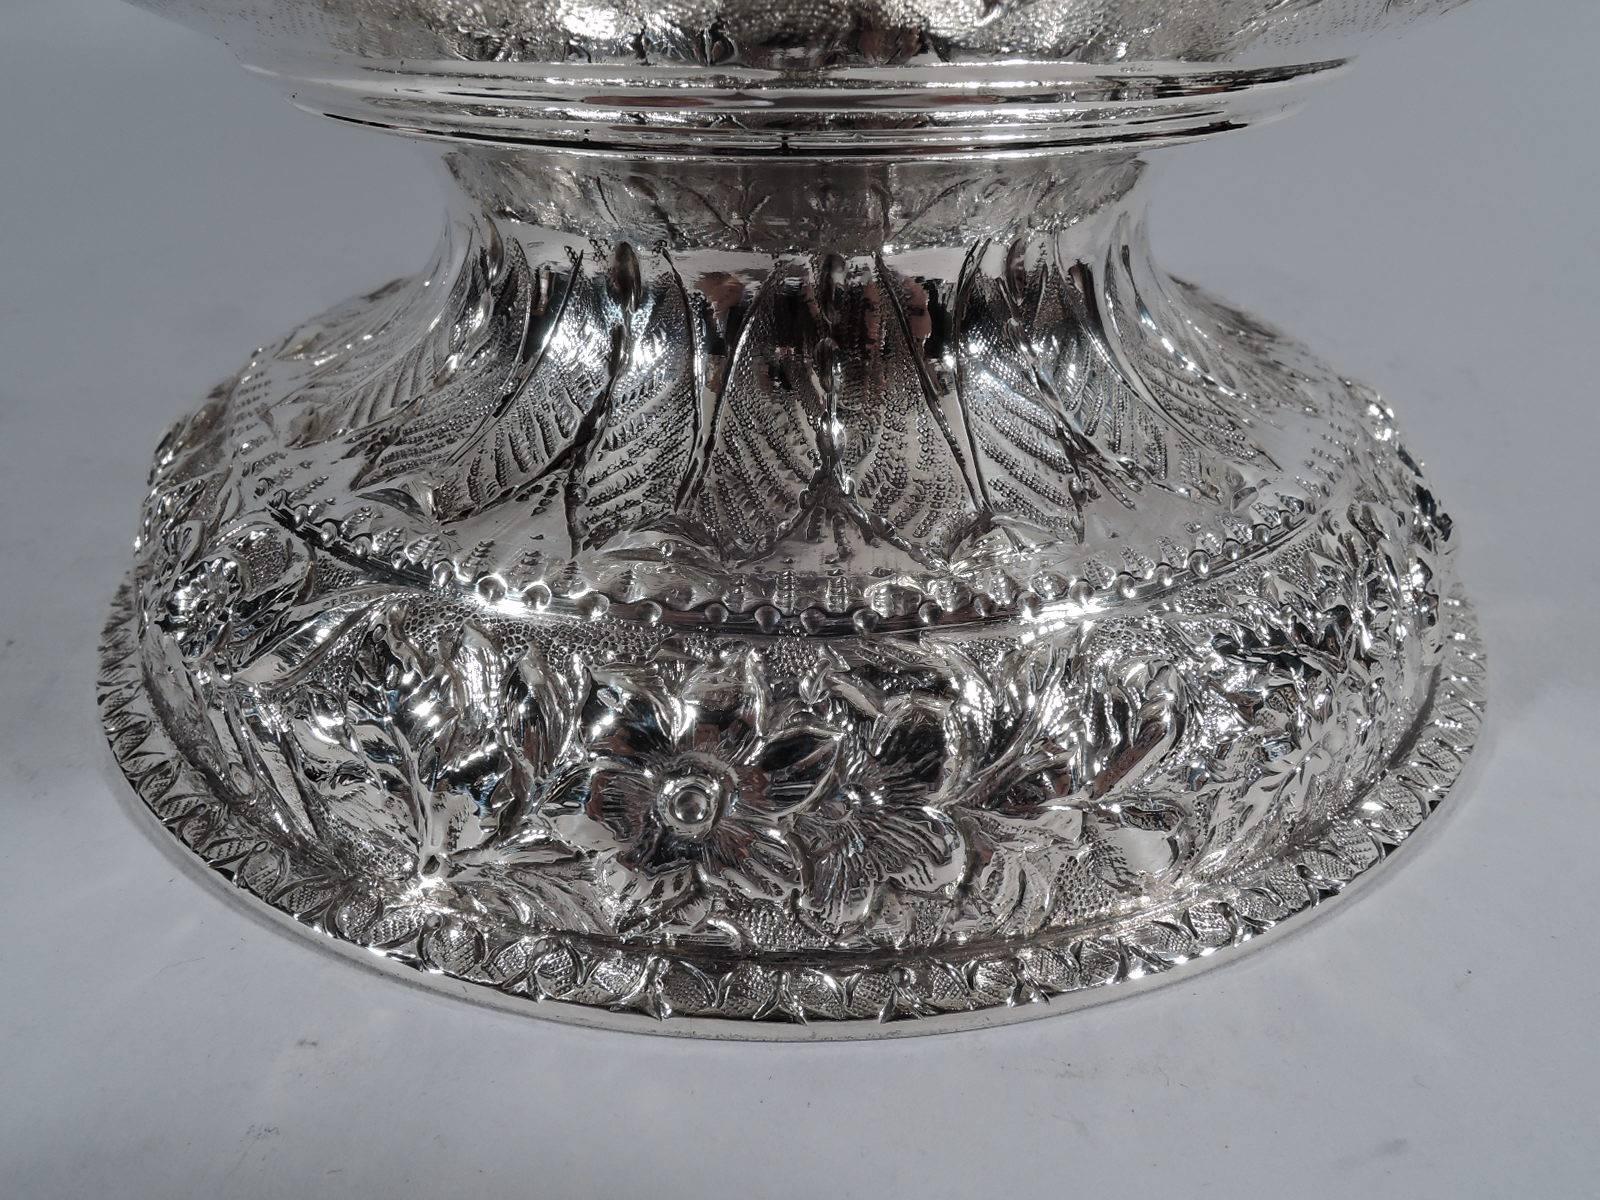 Repoussé Antique Repousse Silver Footed Bowl by Historic Kirk of Baltimore